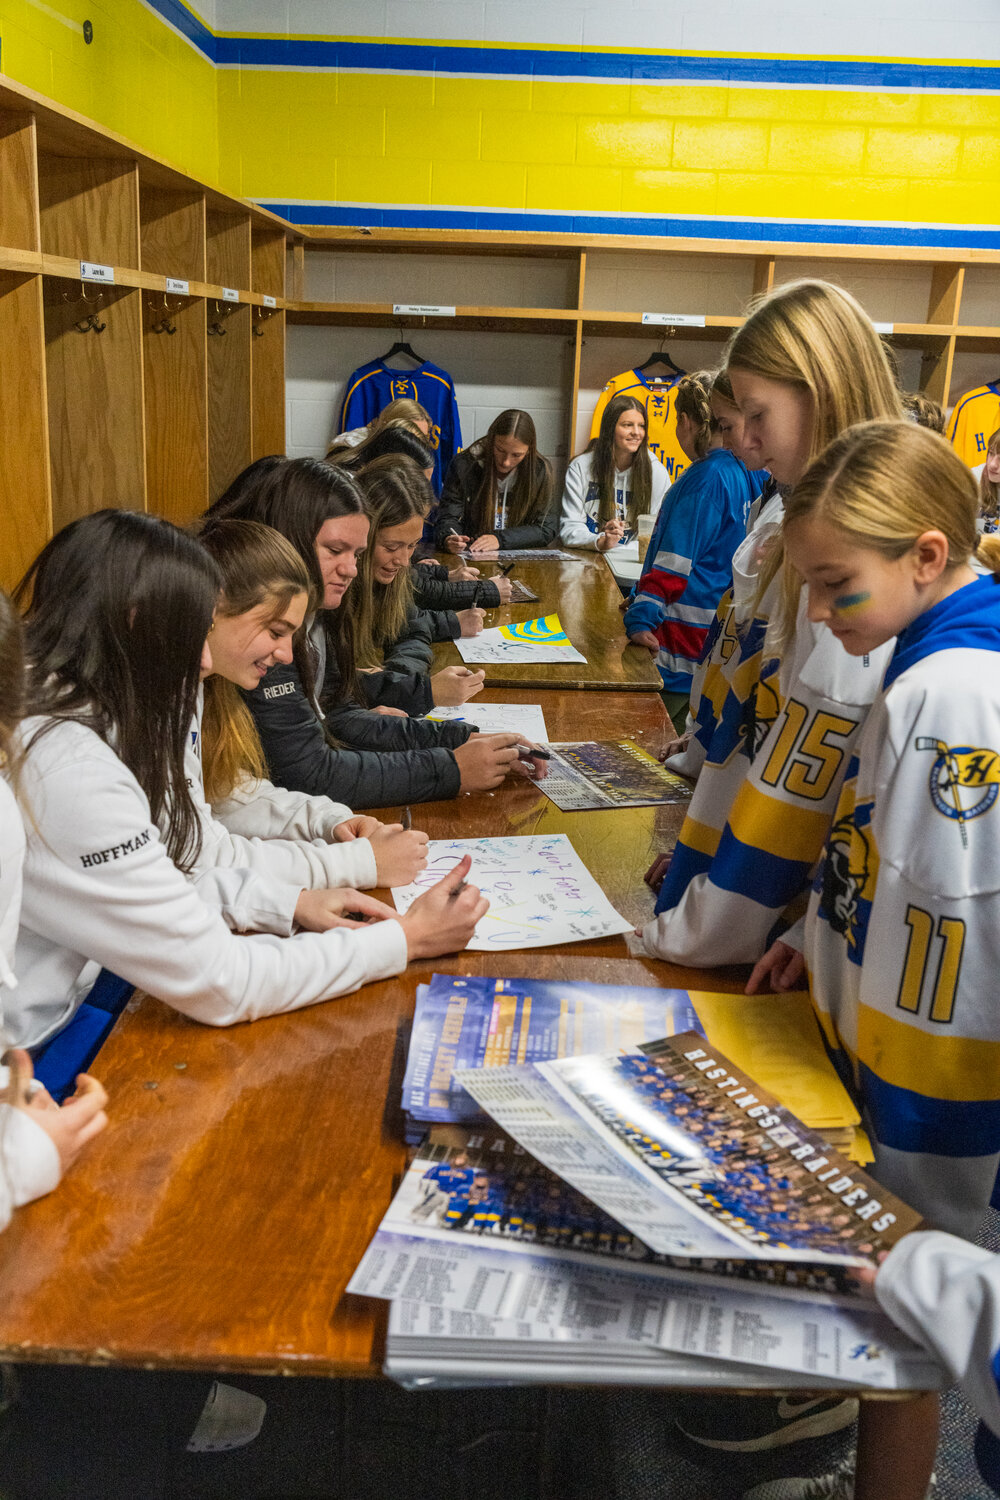 The varsity girls gathered in the locker room with team photos available for the youth hockey players to have for autographs during a meet and greet on Girls Hockey Day.